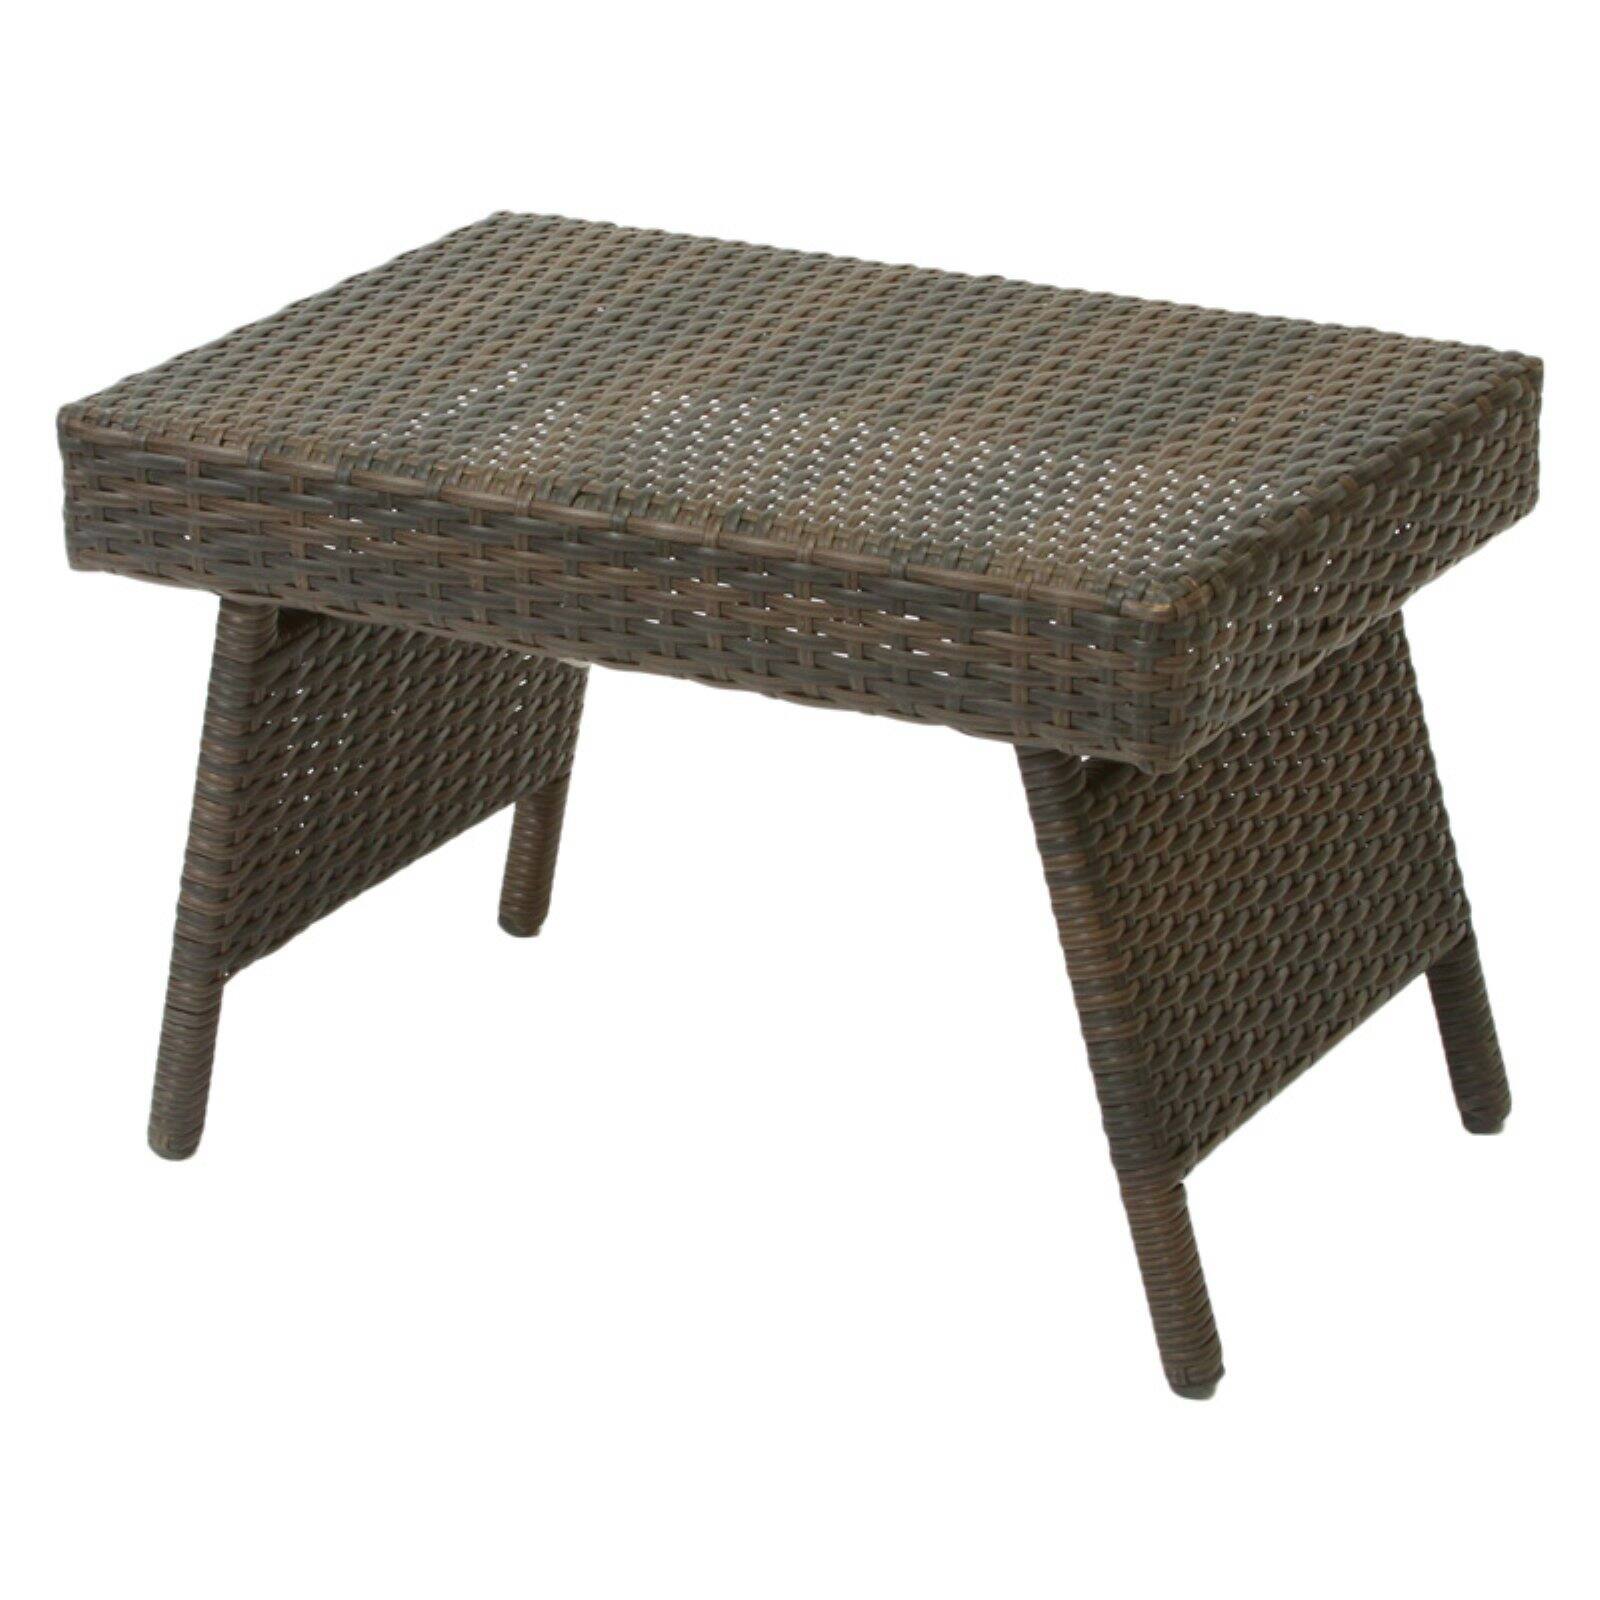 Christopher Knight Home Salem Outdoor Brown Wicker Adjustable Folding Table by  - 16.00 W x 24.00 L x 15.75 H Brown - image 1 of 8